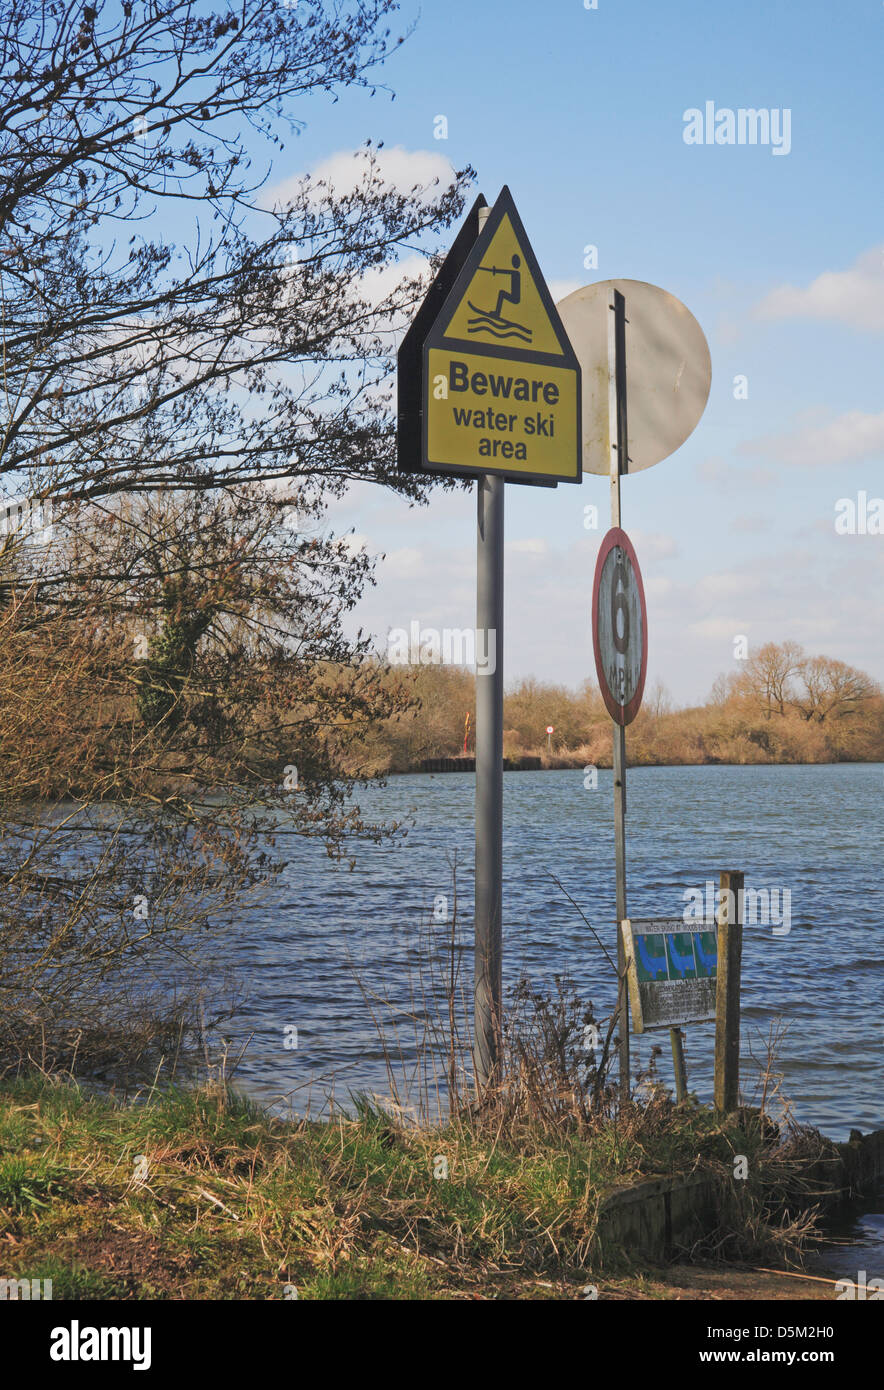 A water ski area warning sign by the River Yare at Bramerton, Norfolk, England, United Kingdom. Stock Photo